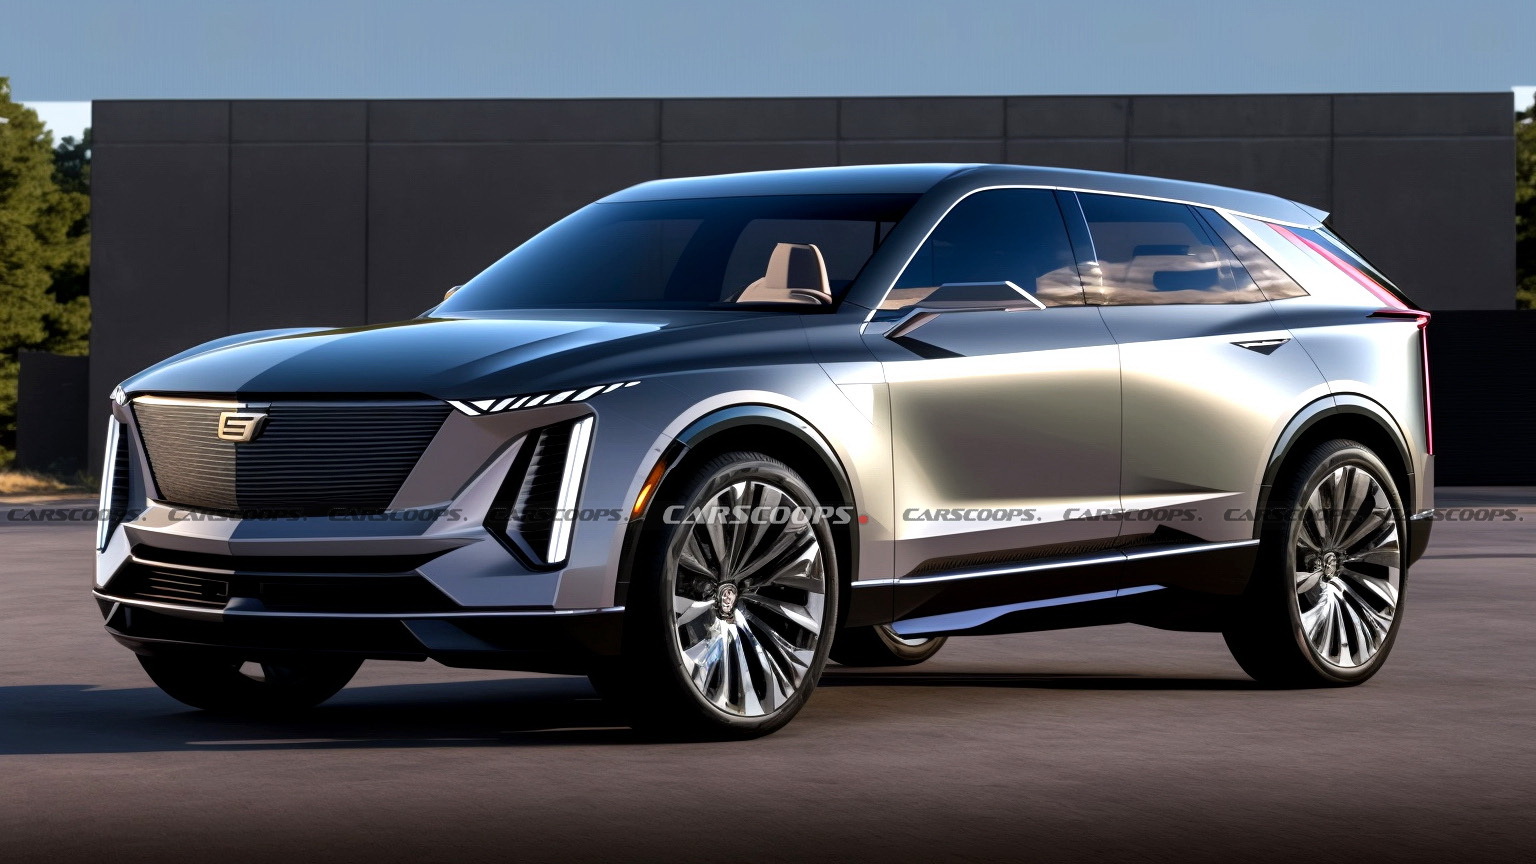 Cadillac To Debut 3 New EVs This Year, One Could Be EntryLevel SUV